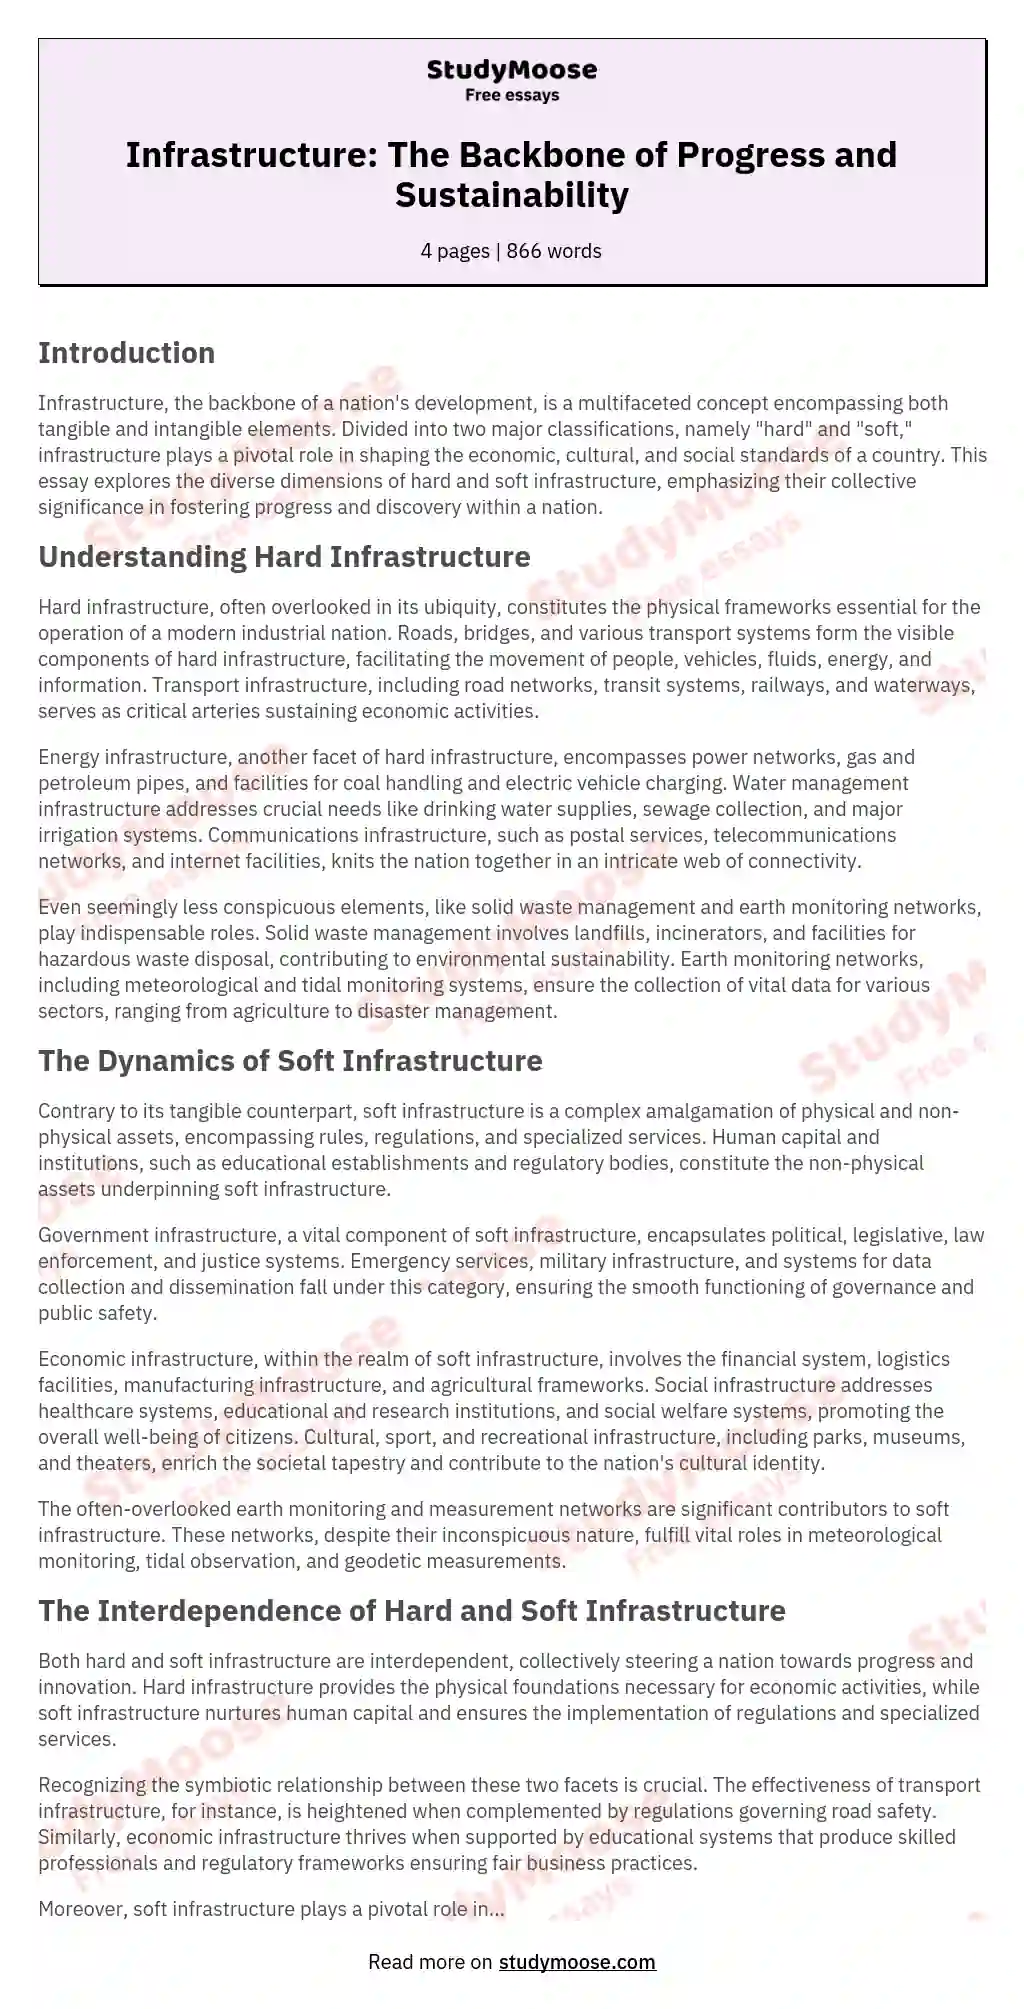 Infrastructure: The Backbone of Progress and Sustainability essay